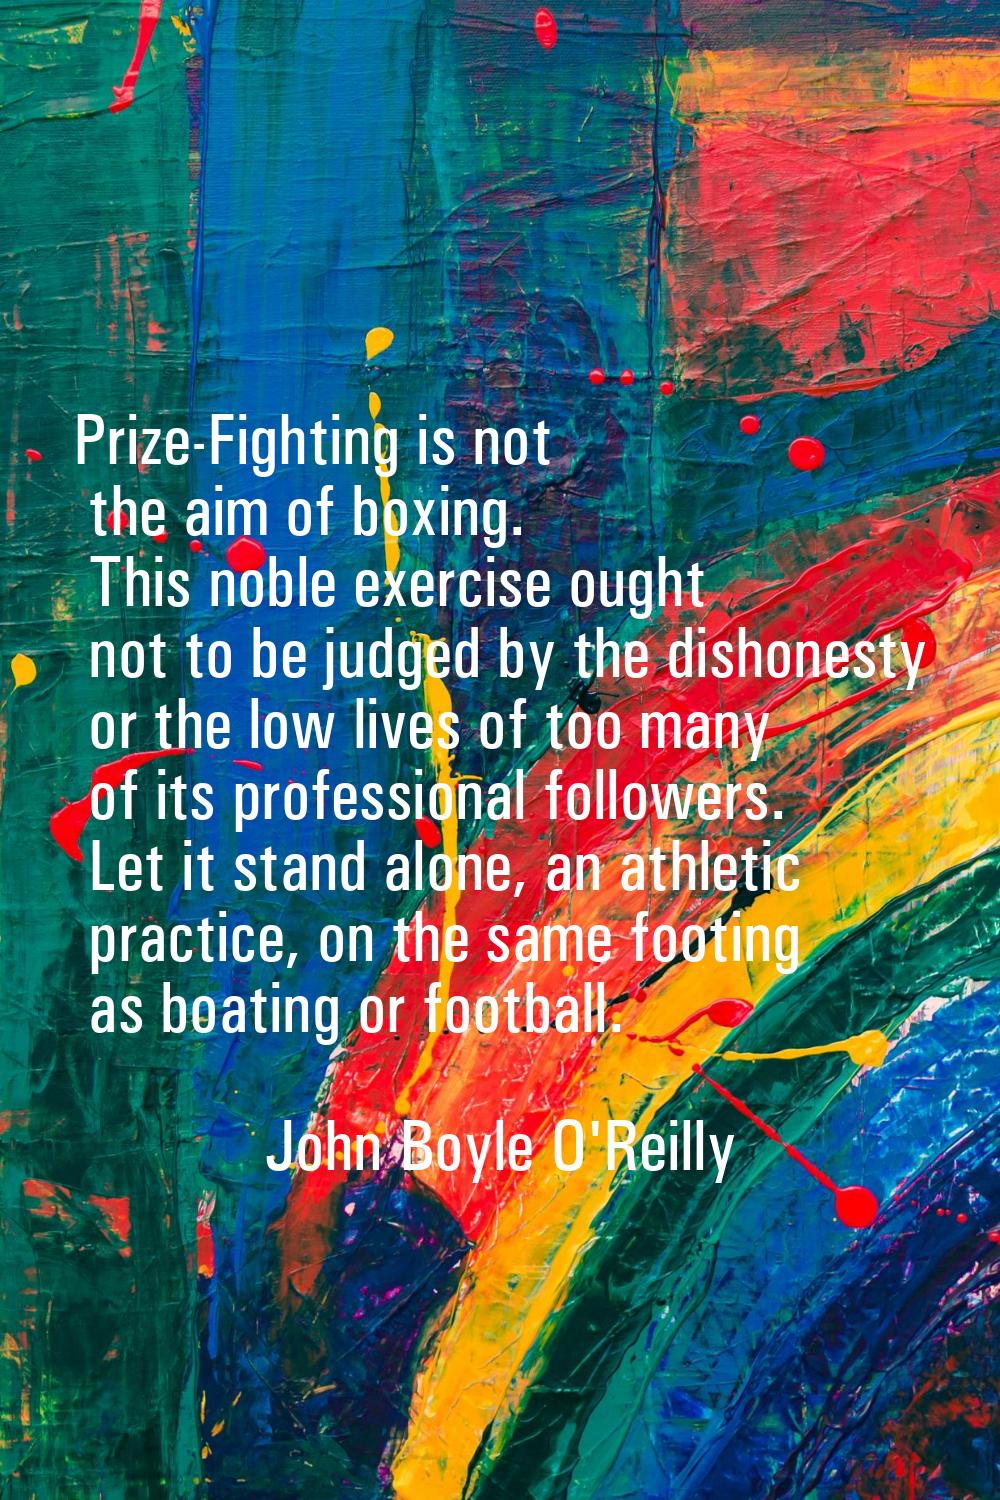 Prize-Fighting is not the aim of boxing. This noble exercise ought not to be judged by the dishones